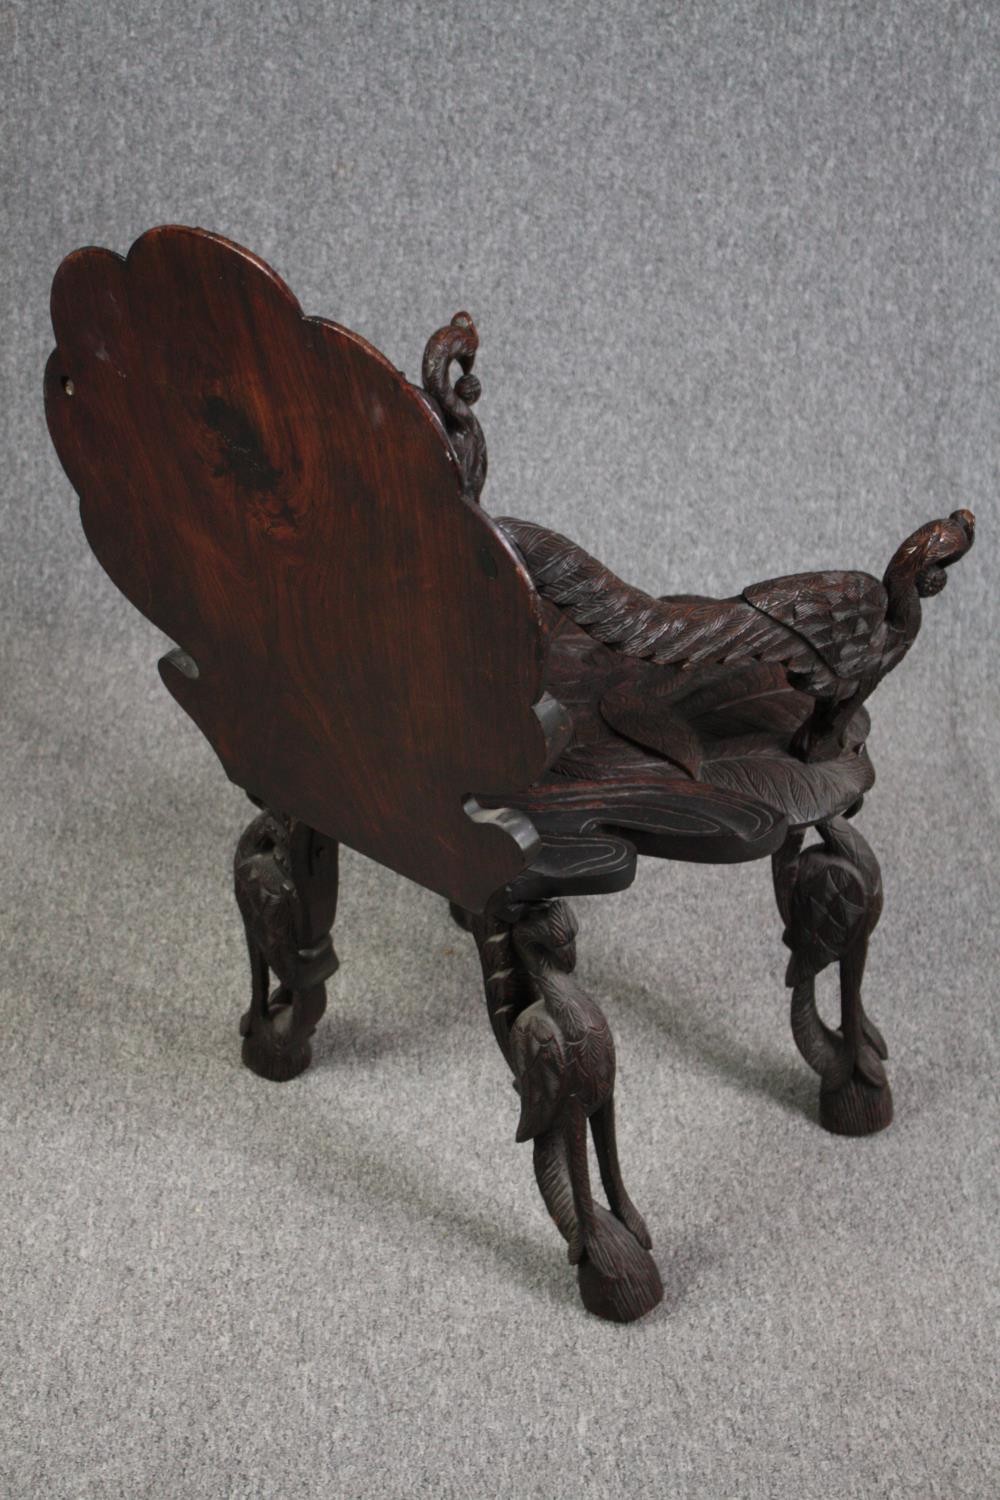 Grotto chair, 19th century Venetian style with allover bird and foliate carving. H.87cm. - Image 4 of 11